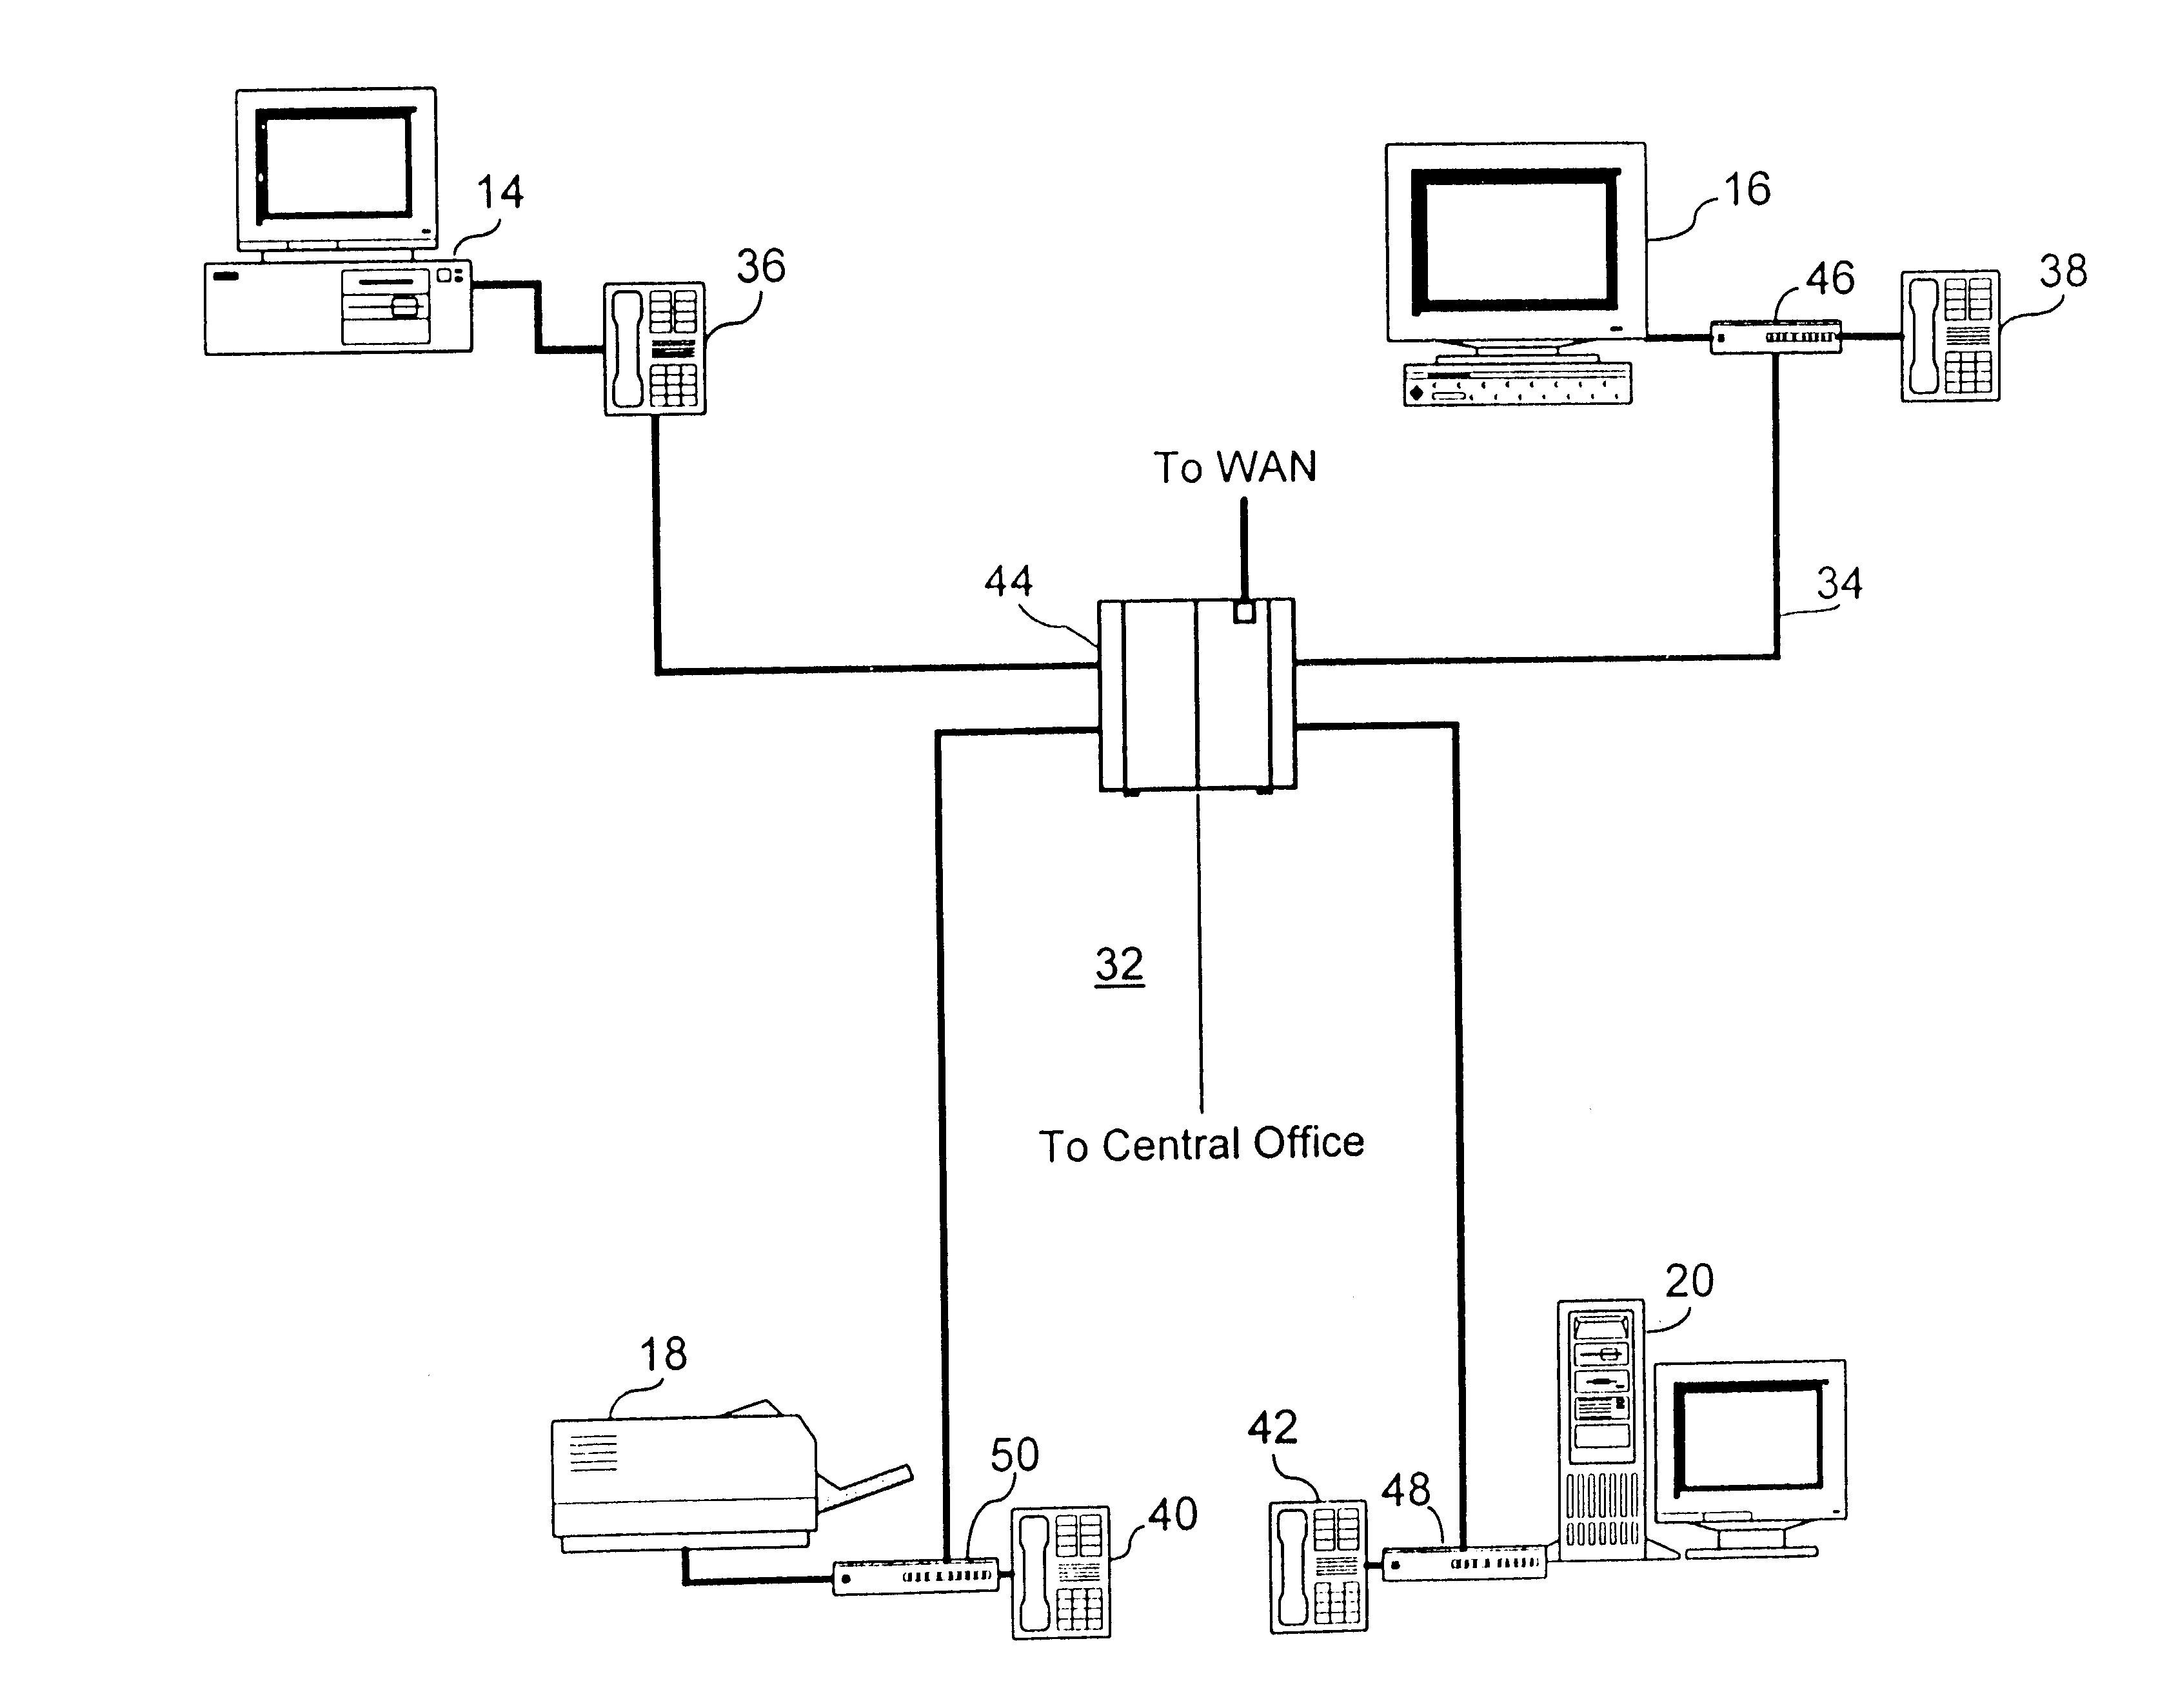 Method for initializing and allocating bandwidth in a permanent virtual connection for the transmission and control of audio, video, and computer data over a single network fabric